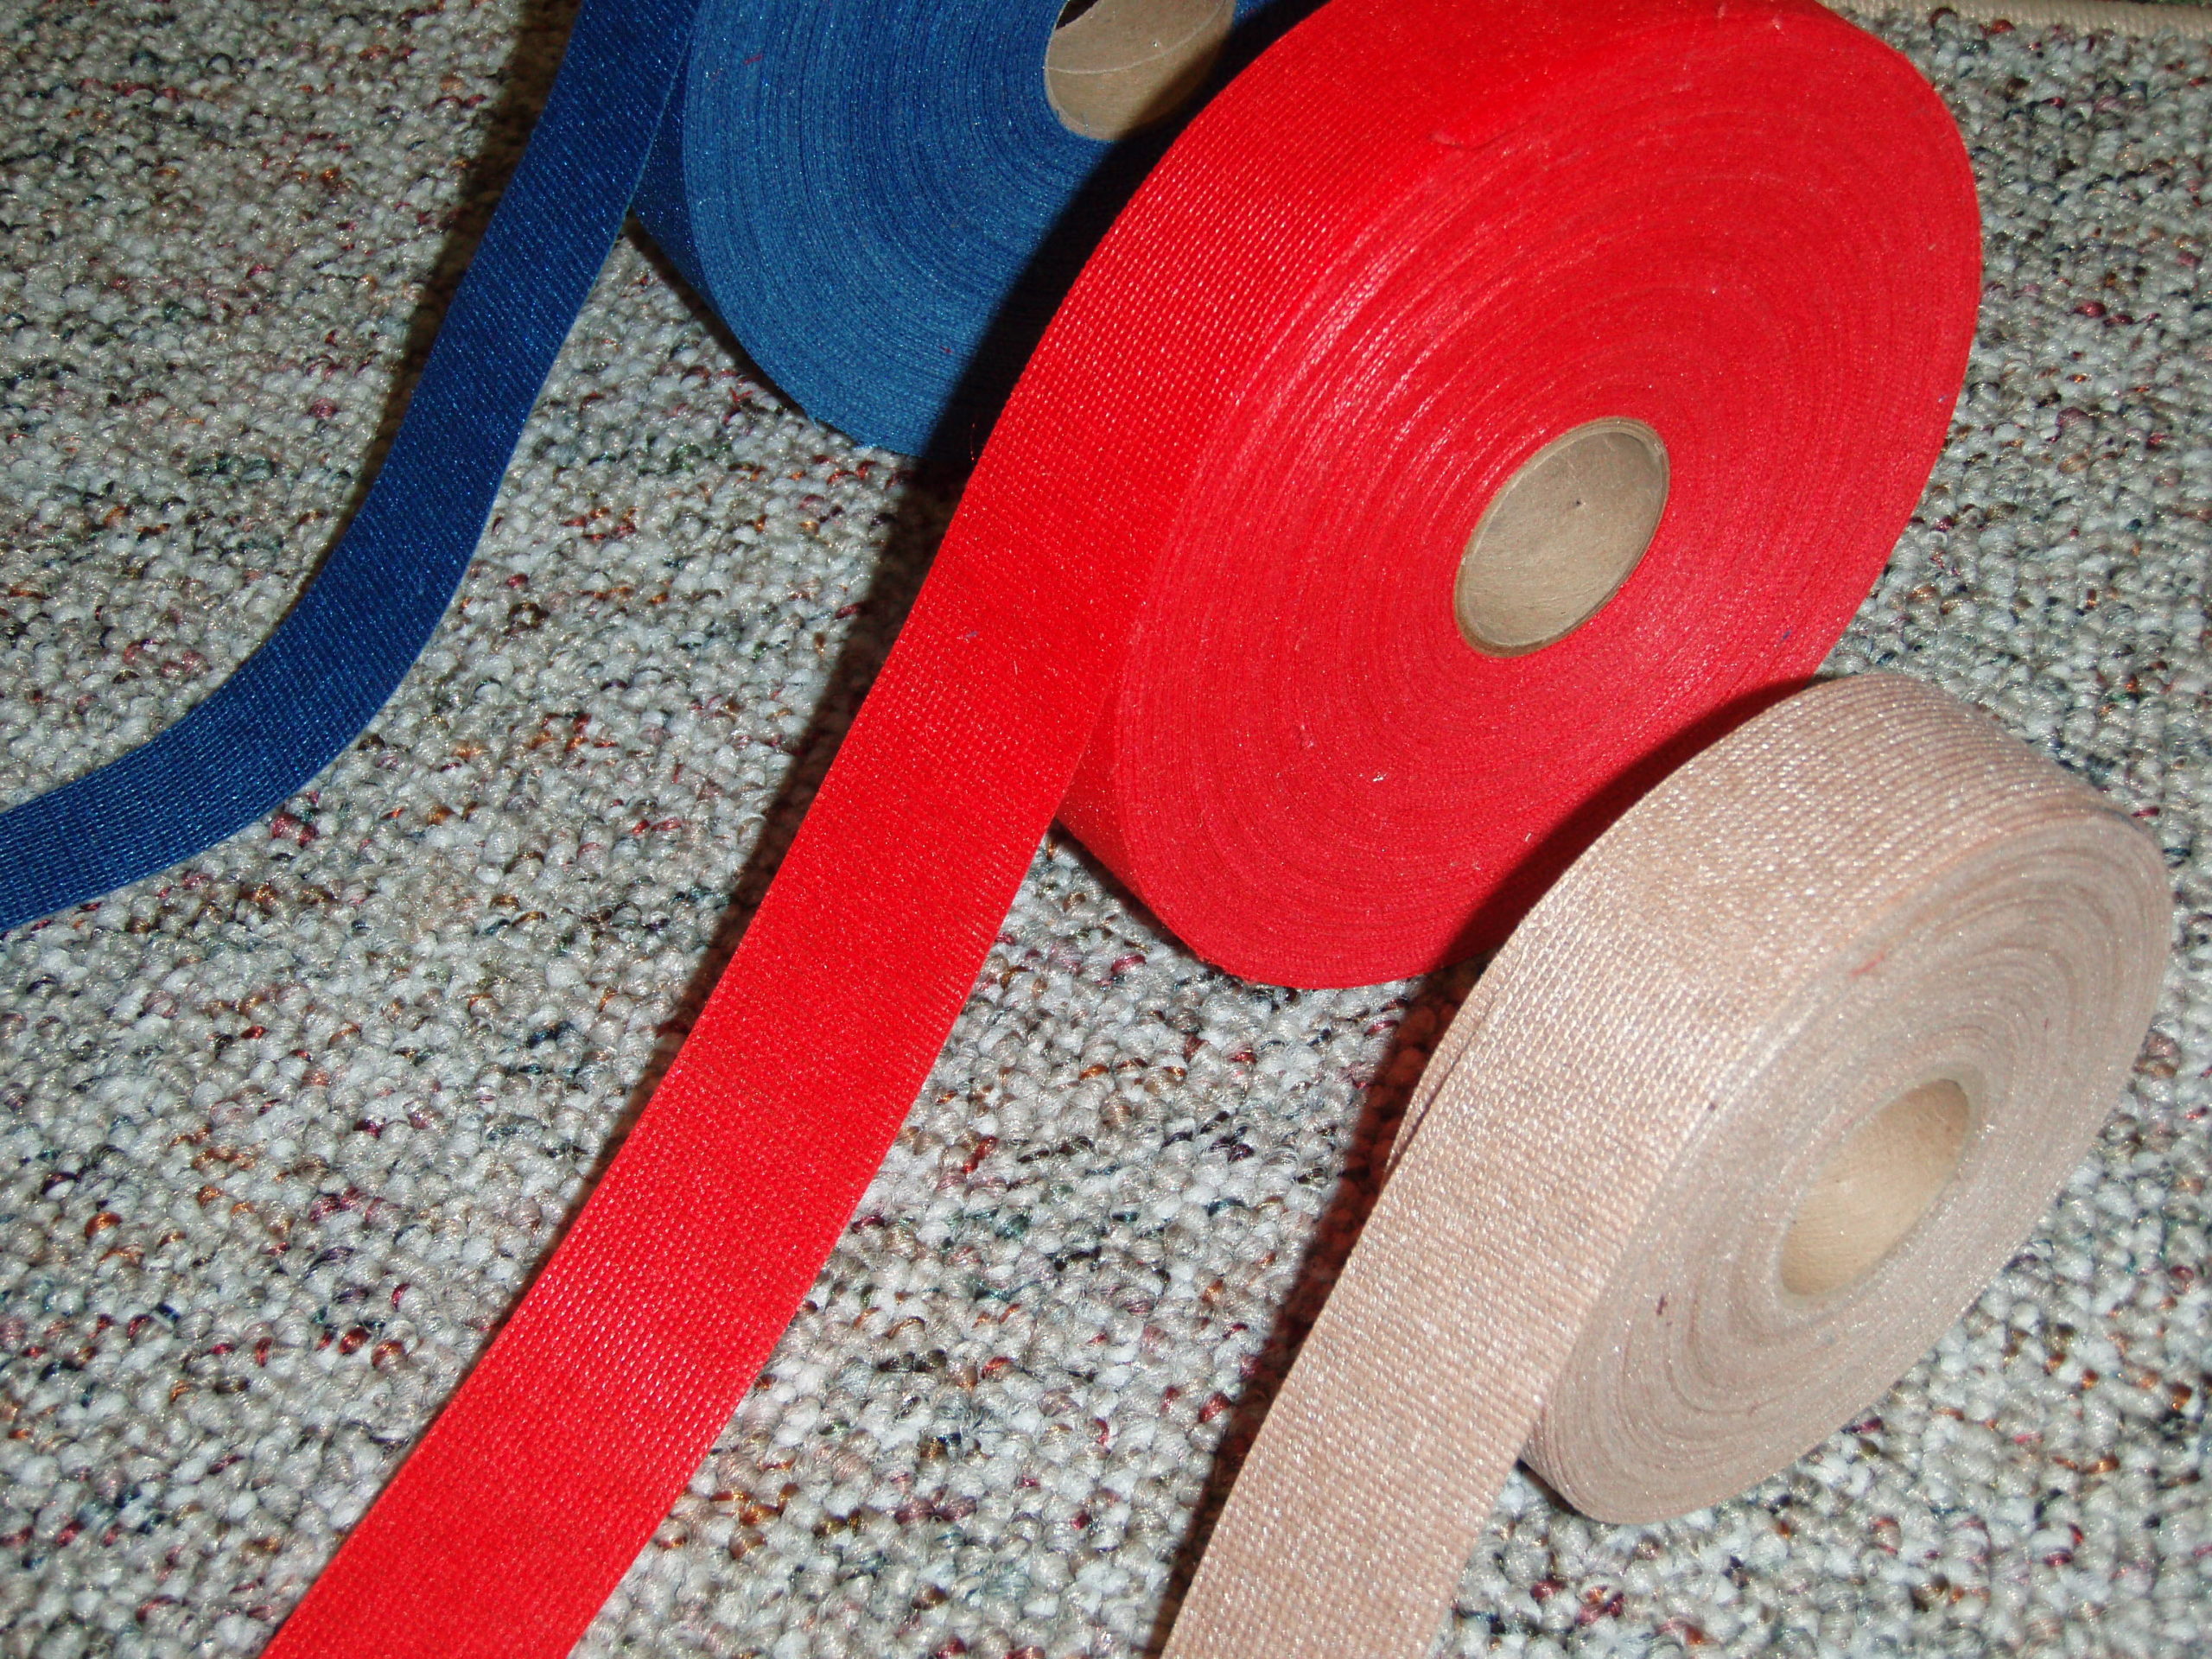 What Is Carpet Binding Tape? - Bond Products Inc